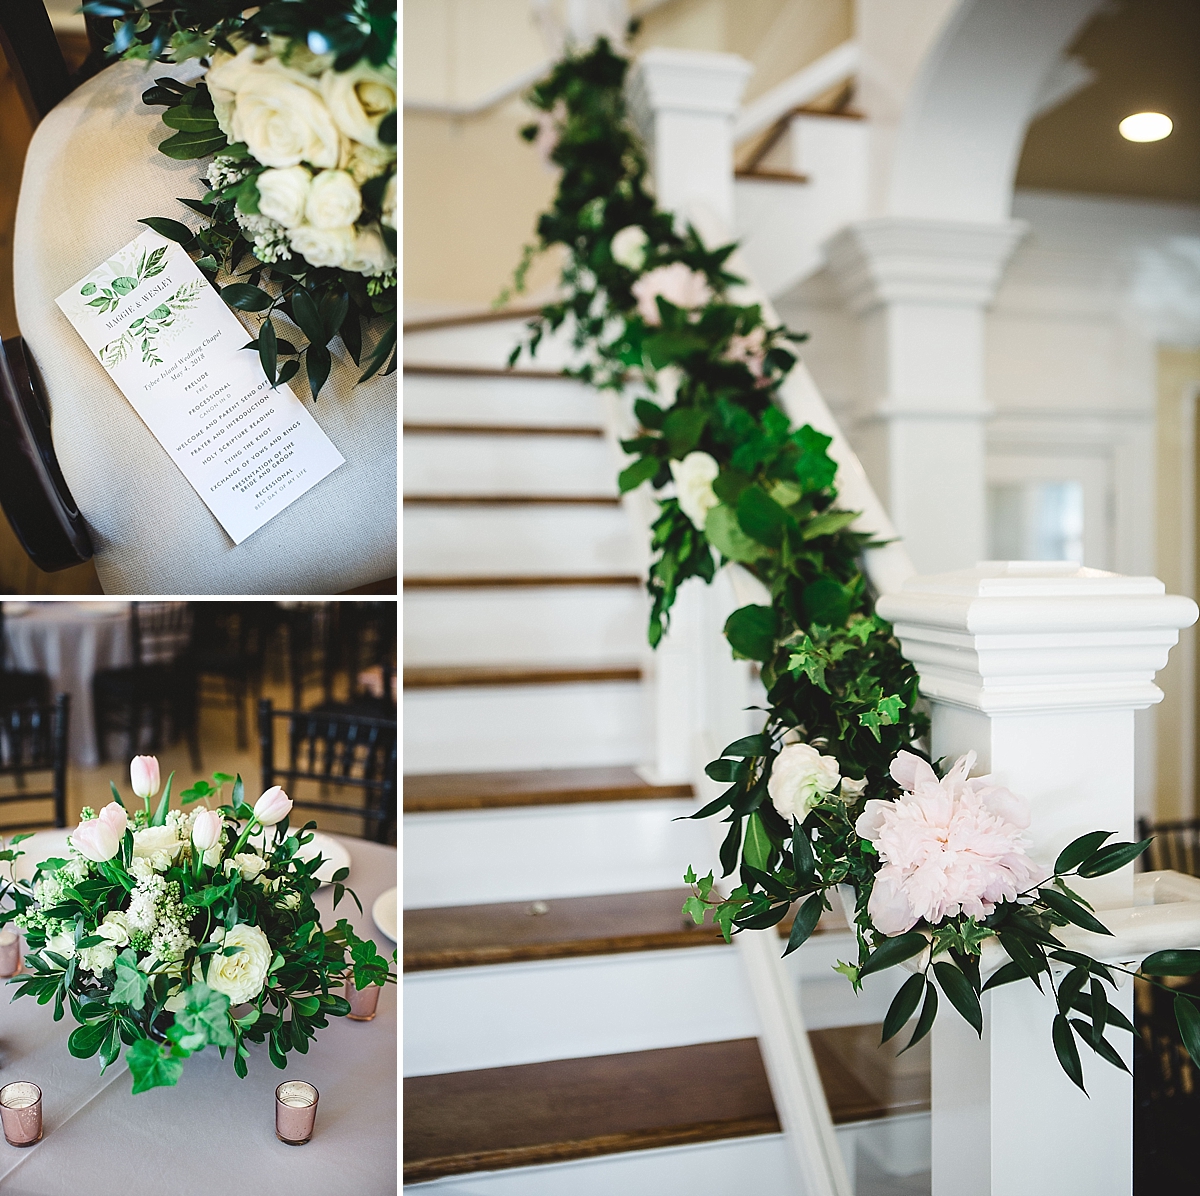 Maggie and Wesley’s Tybee Island Wedding Chapel Wedding by Izzy Hudgins Photography, Flowers by Kato Floral Designs